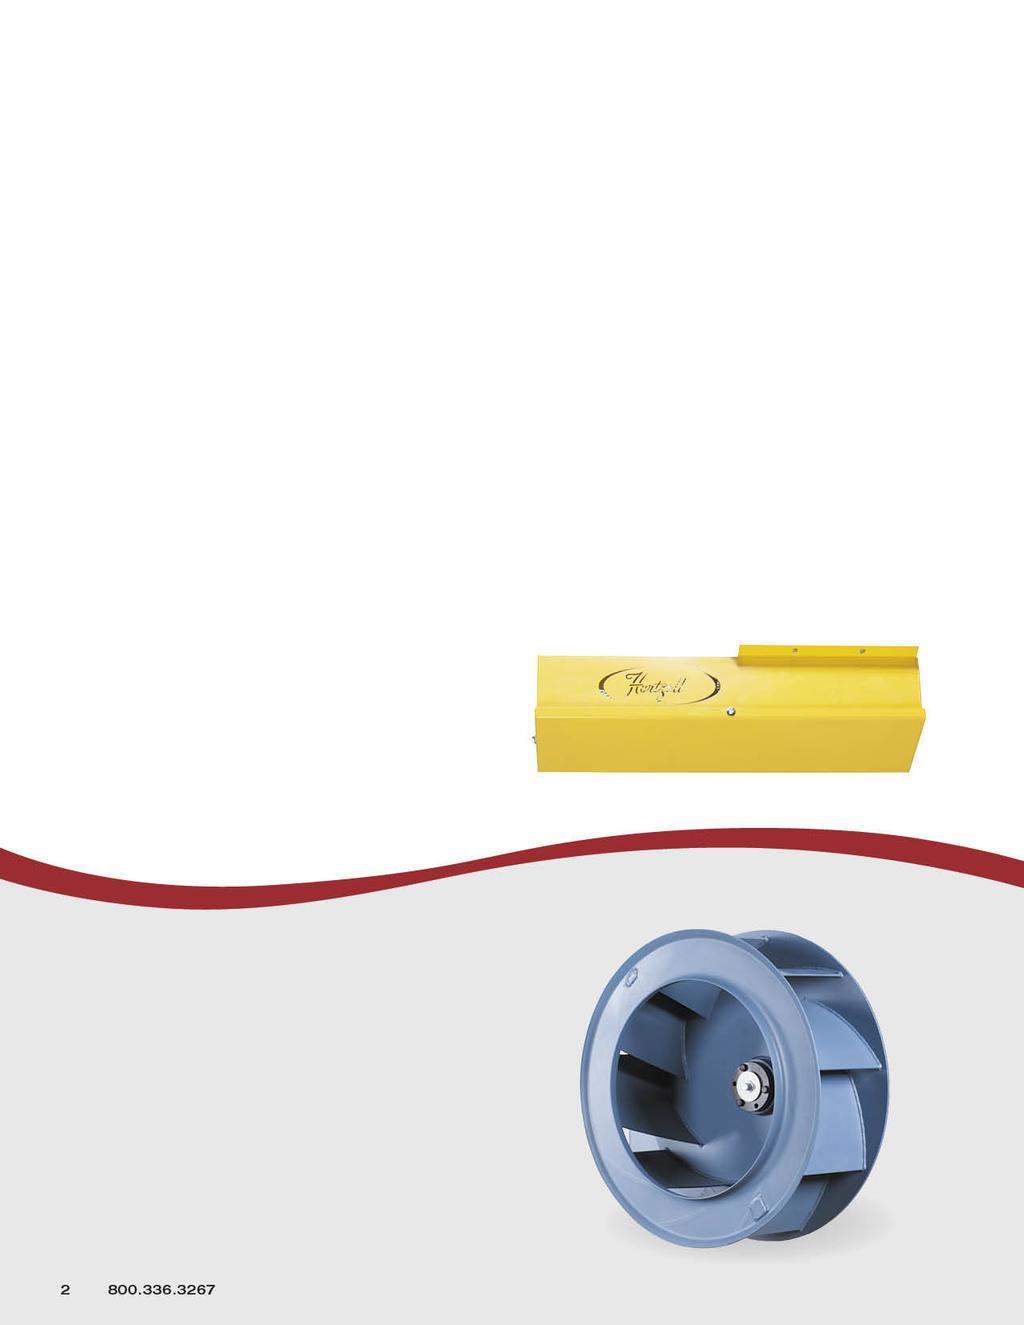 Options and Accessories Shaft seal and extended lube for fan bearing is included in the standard construction.